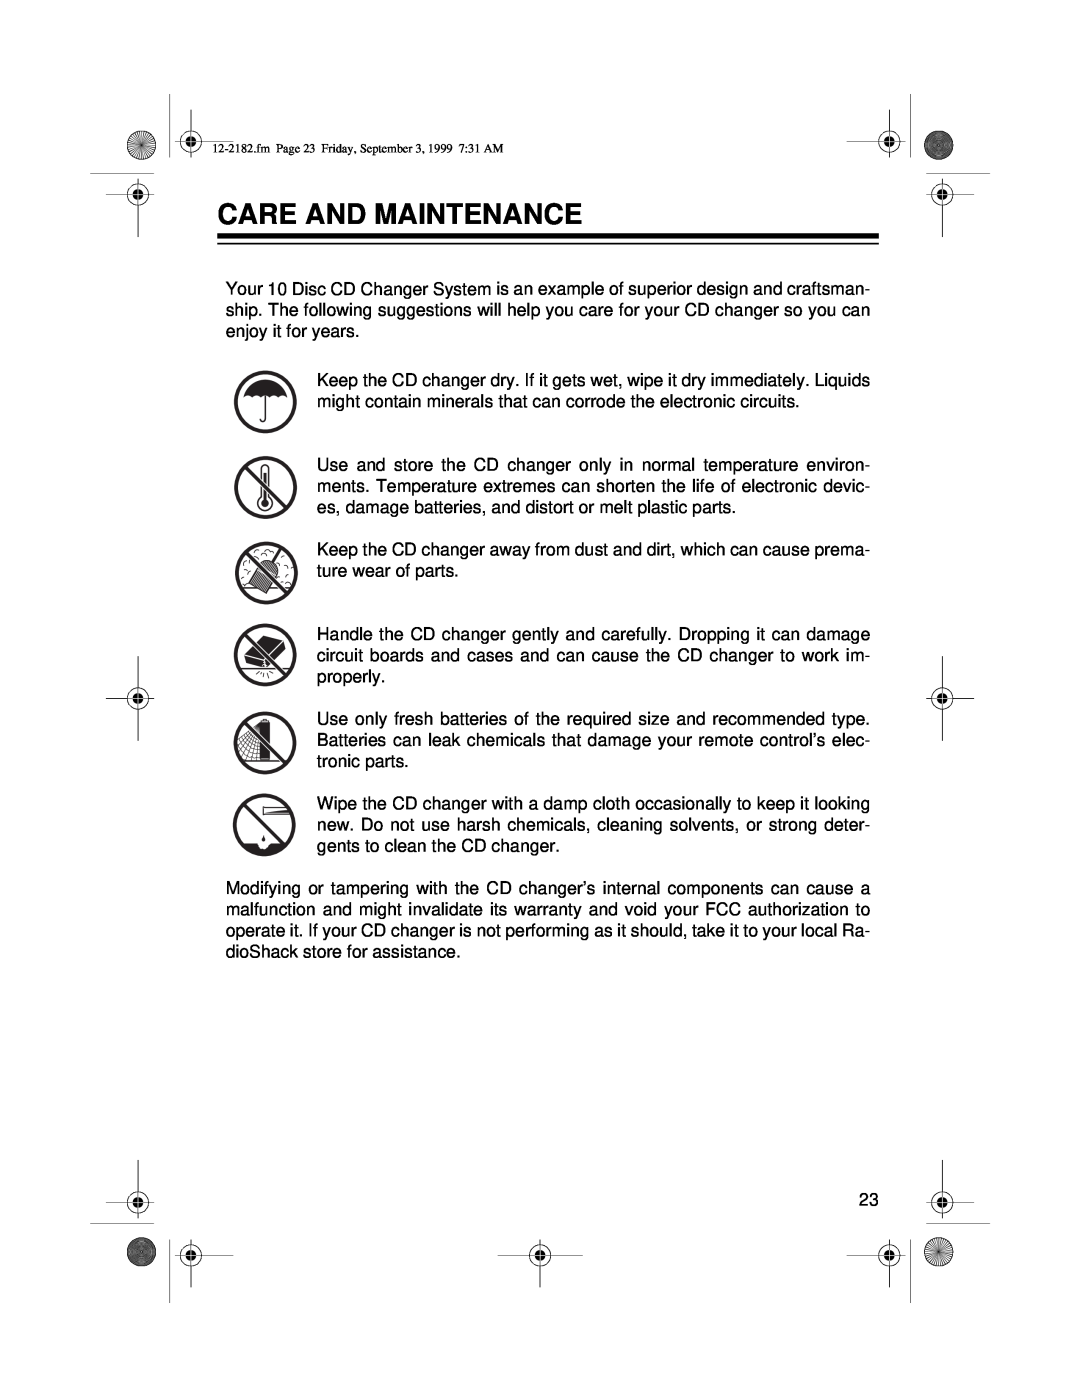 Radio Shack 10 Disc CD Changer owner manual Care And Maintenance 